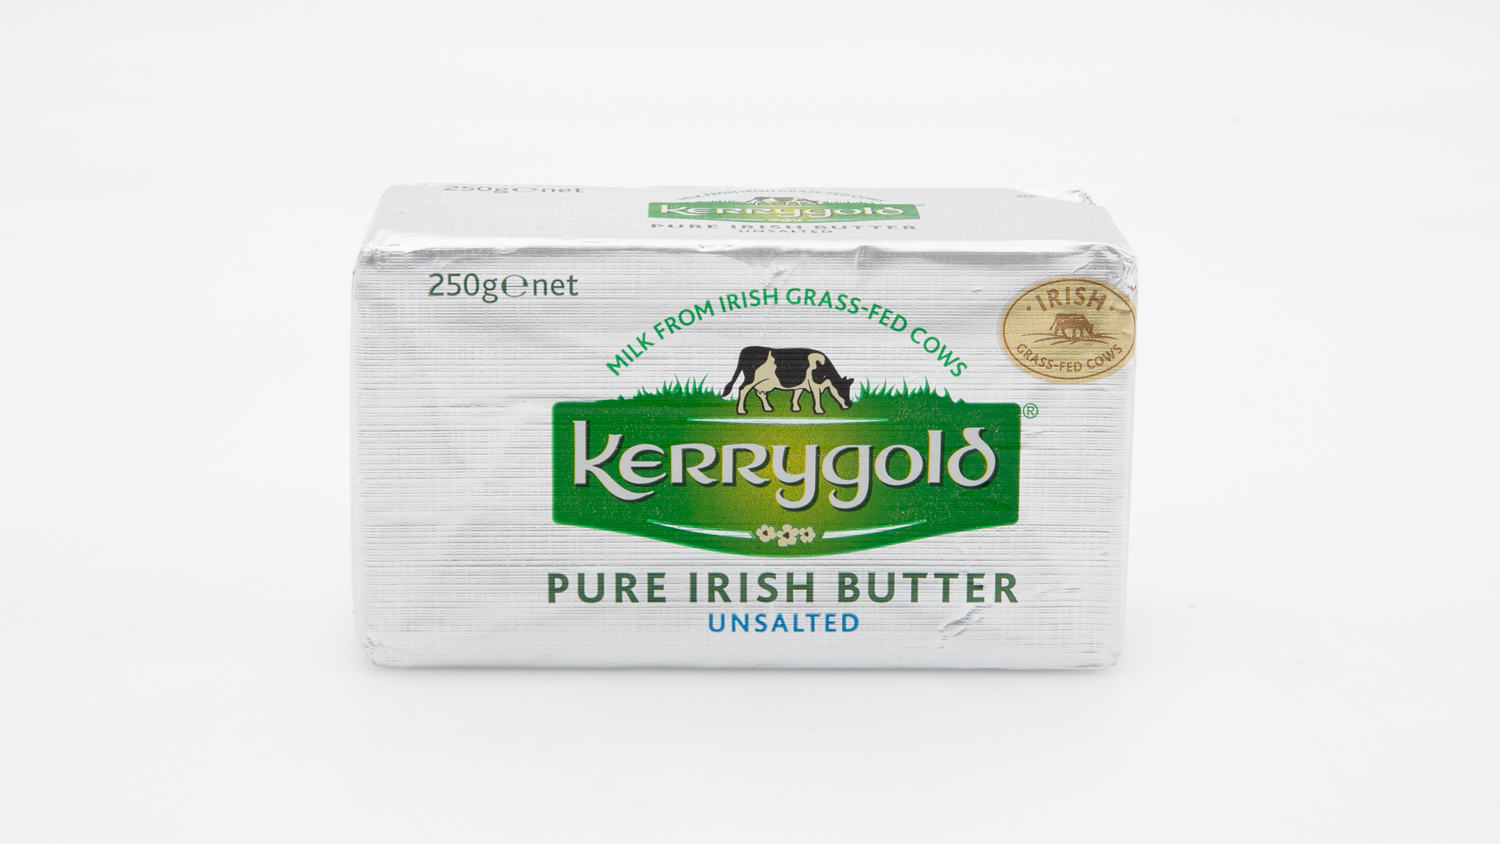 Kerrygold Pure Irish Butter Unsalted carousel image